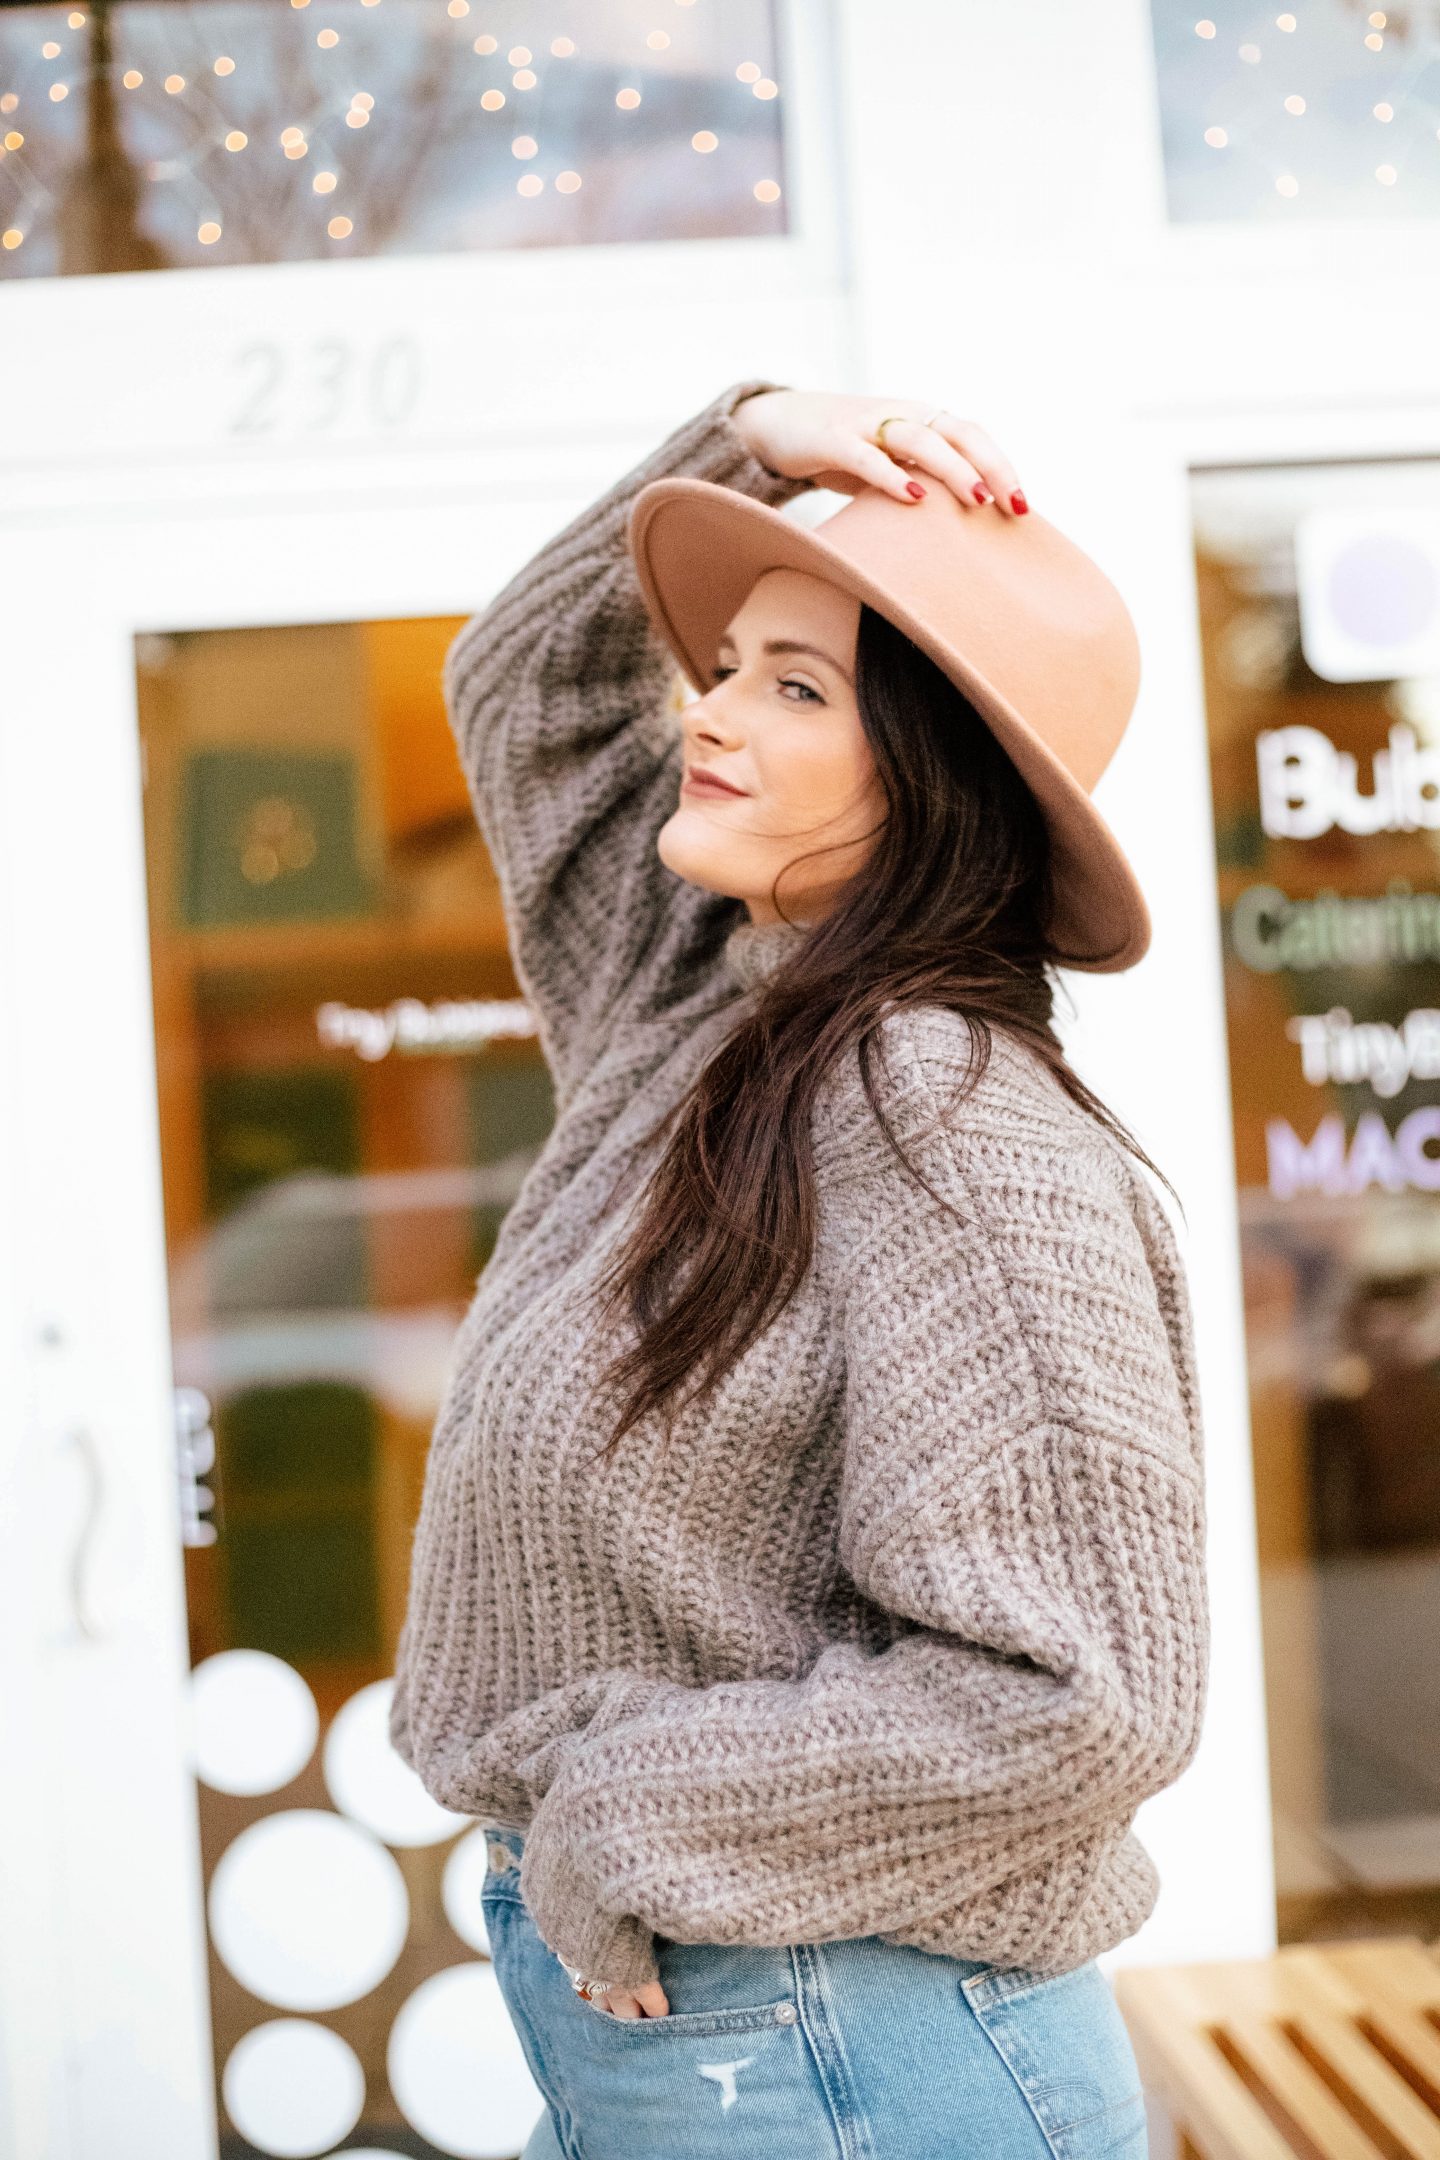 Why I Can’t Stop Styling This Hat + Splurging On Items